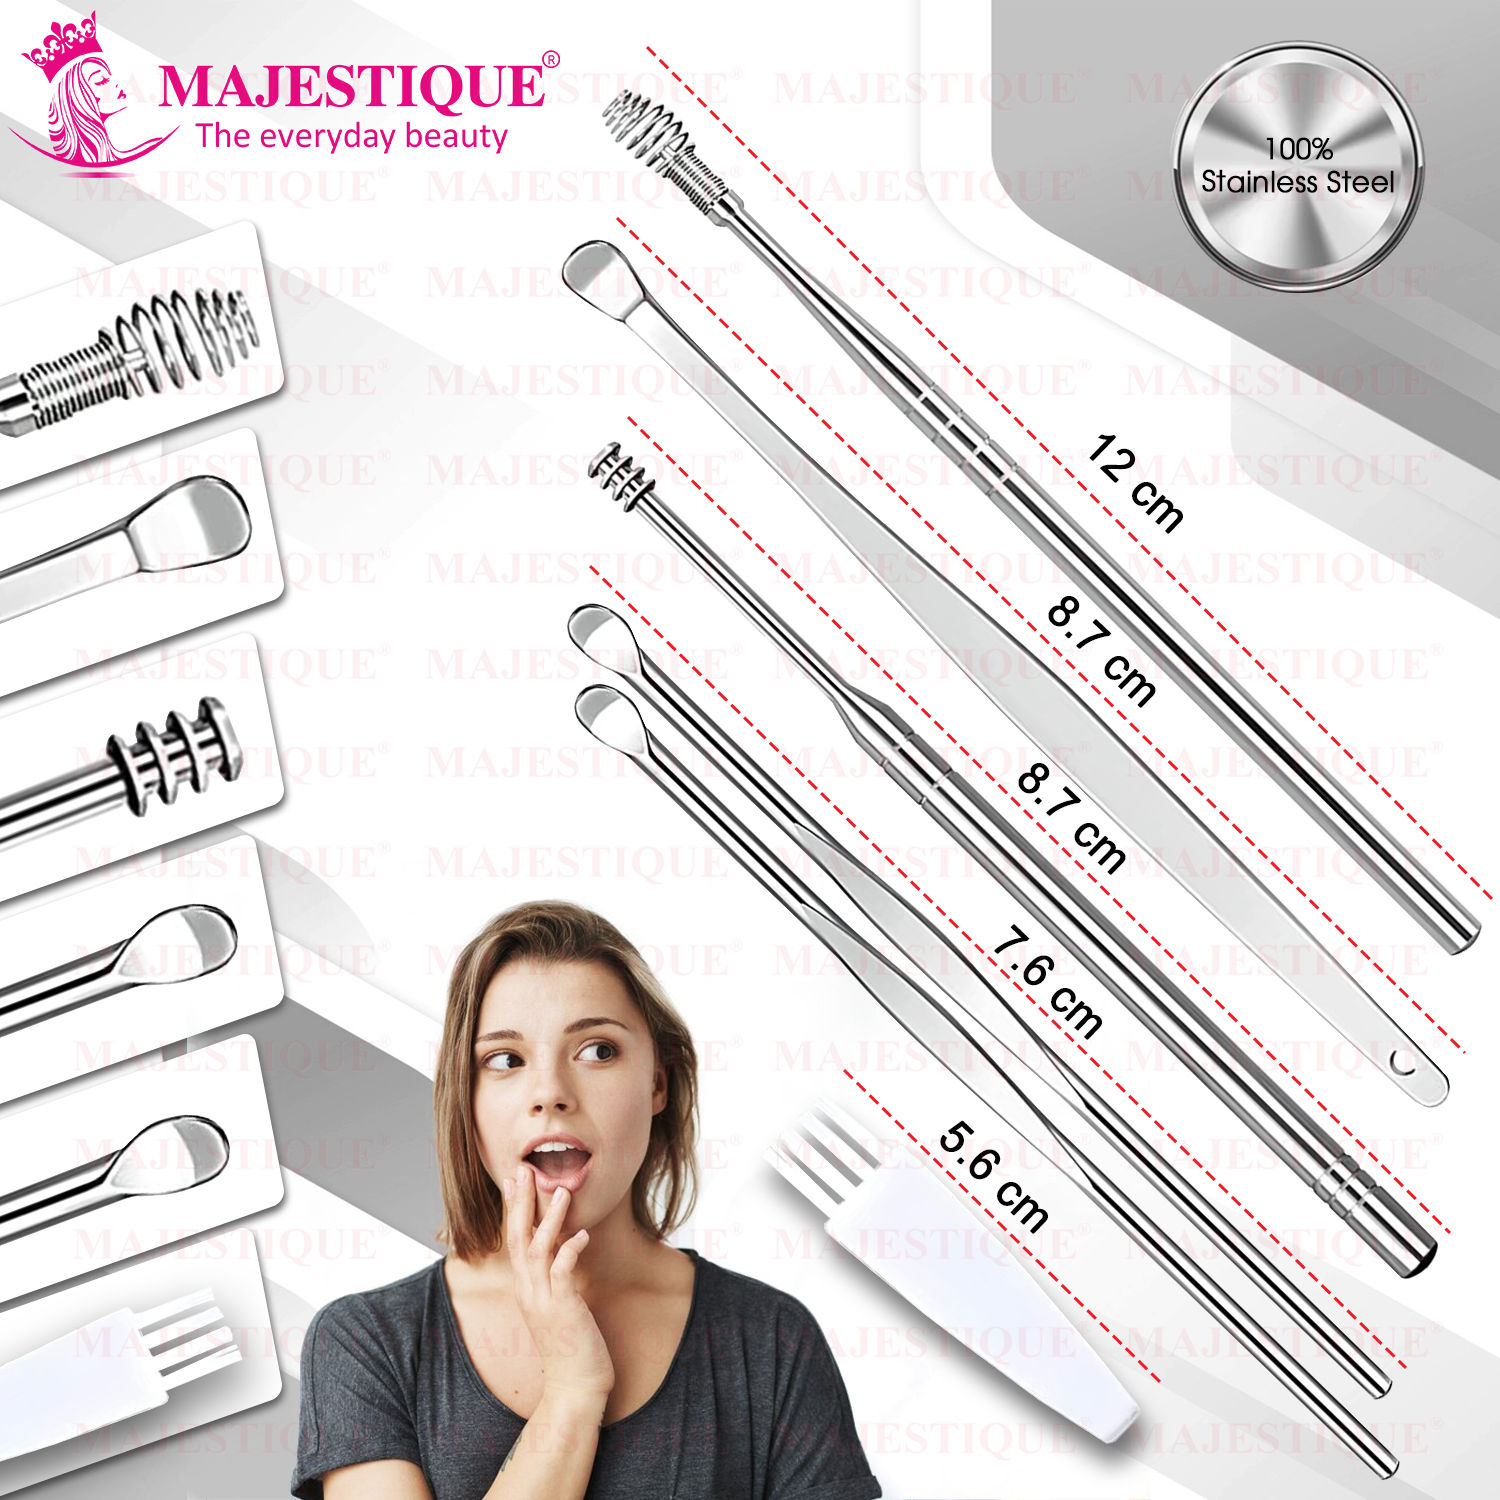 Majestique Earwax Removal Kit Complete Set Ear Care and Wax